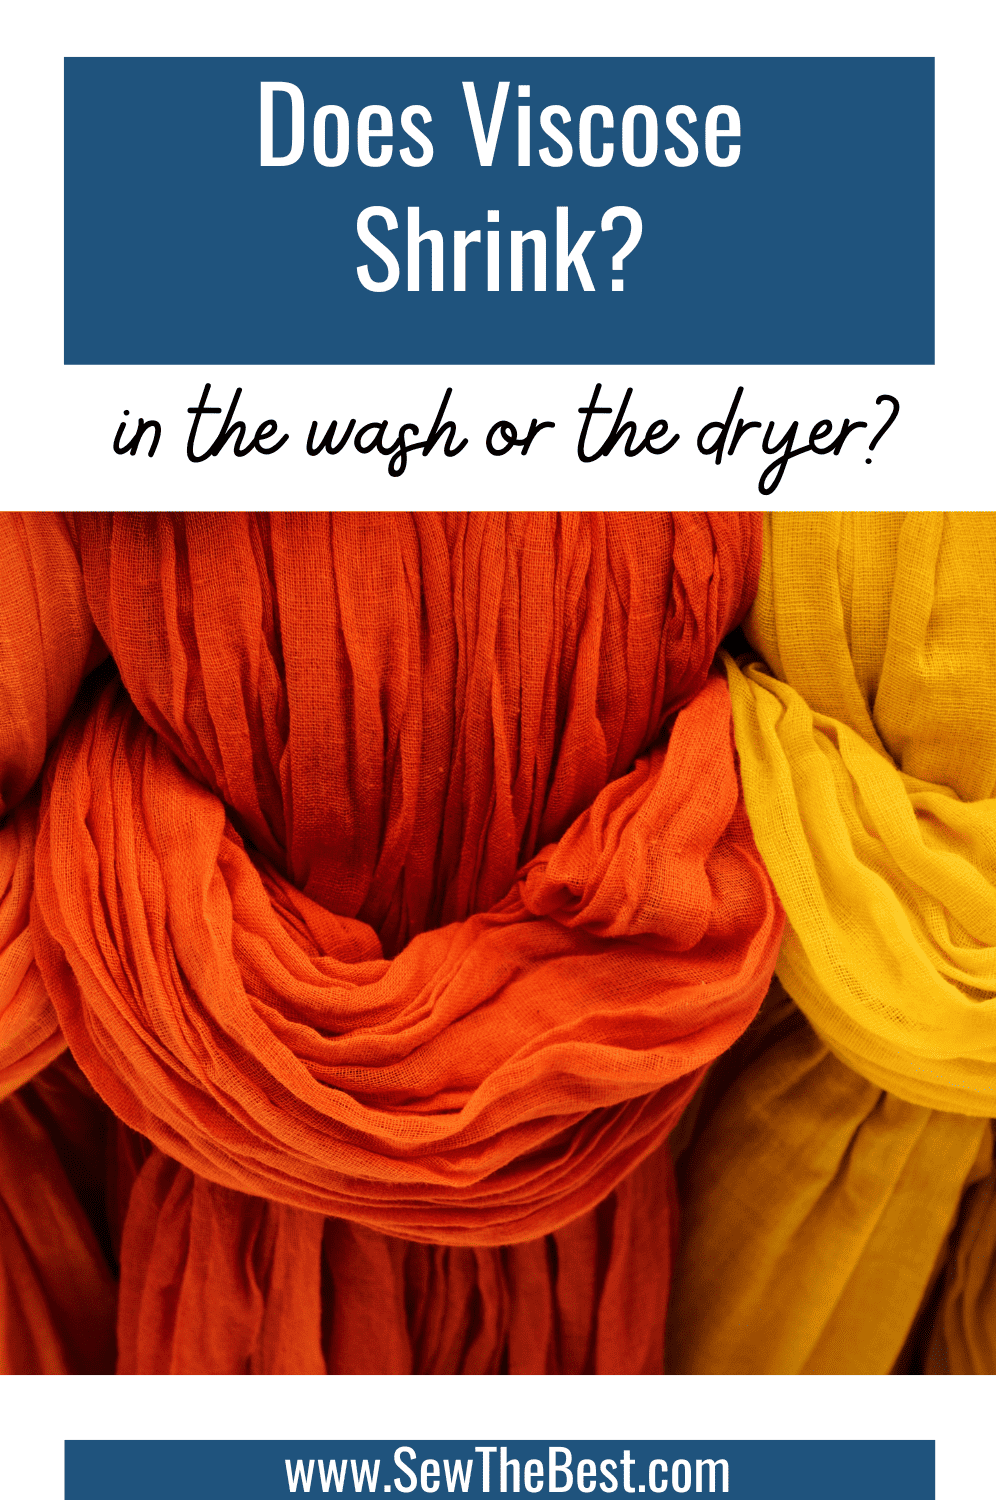 Does Viscose Shrink? In the wash or dryer? Picture of orange and yellow fabric follows